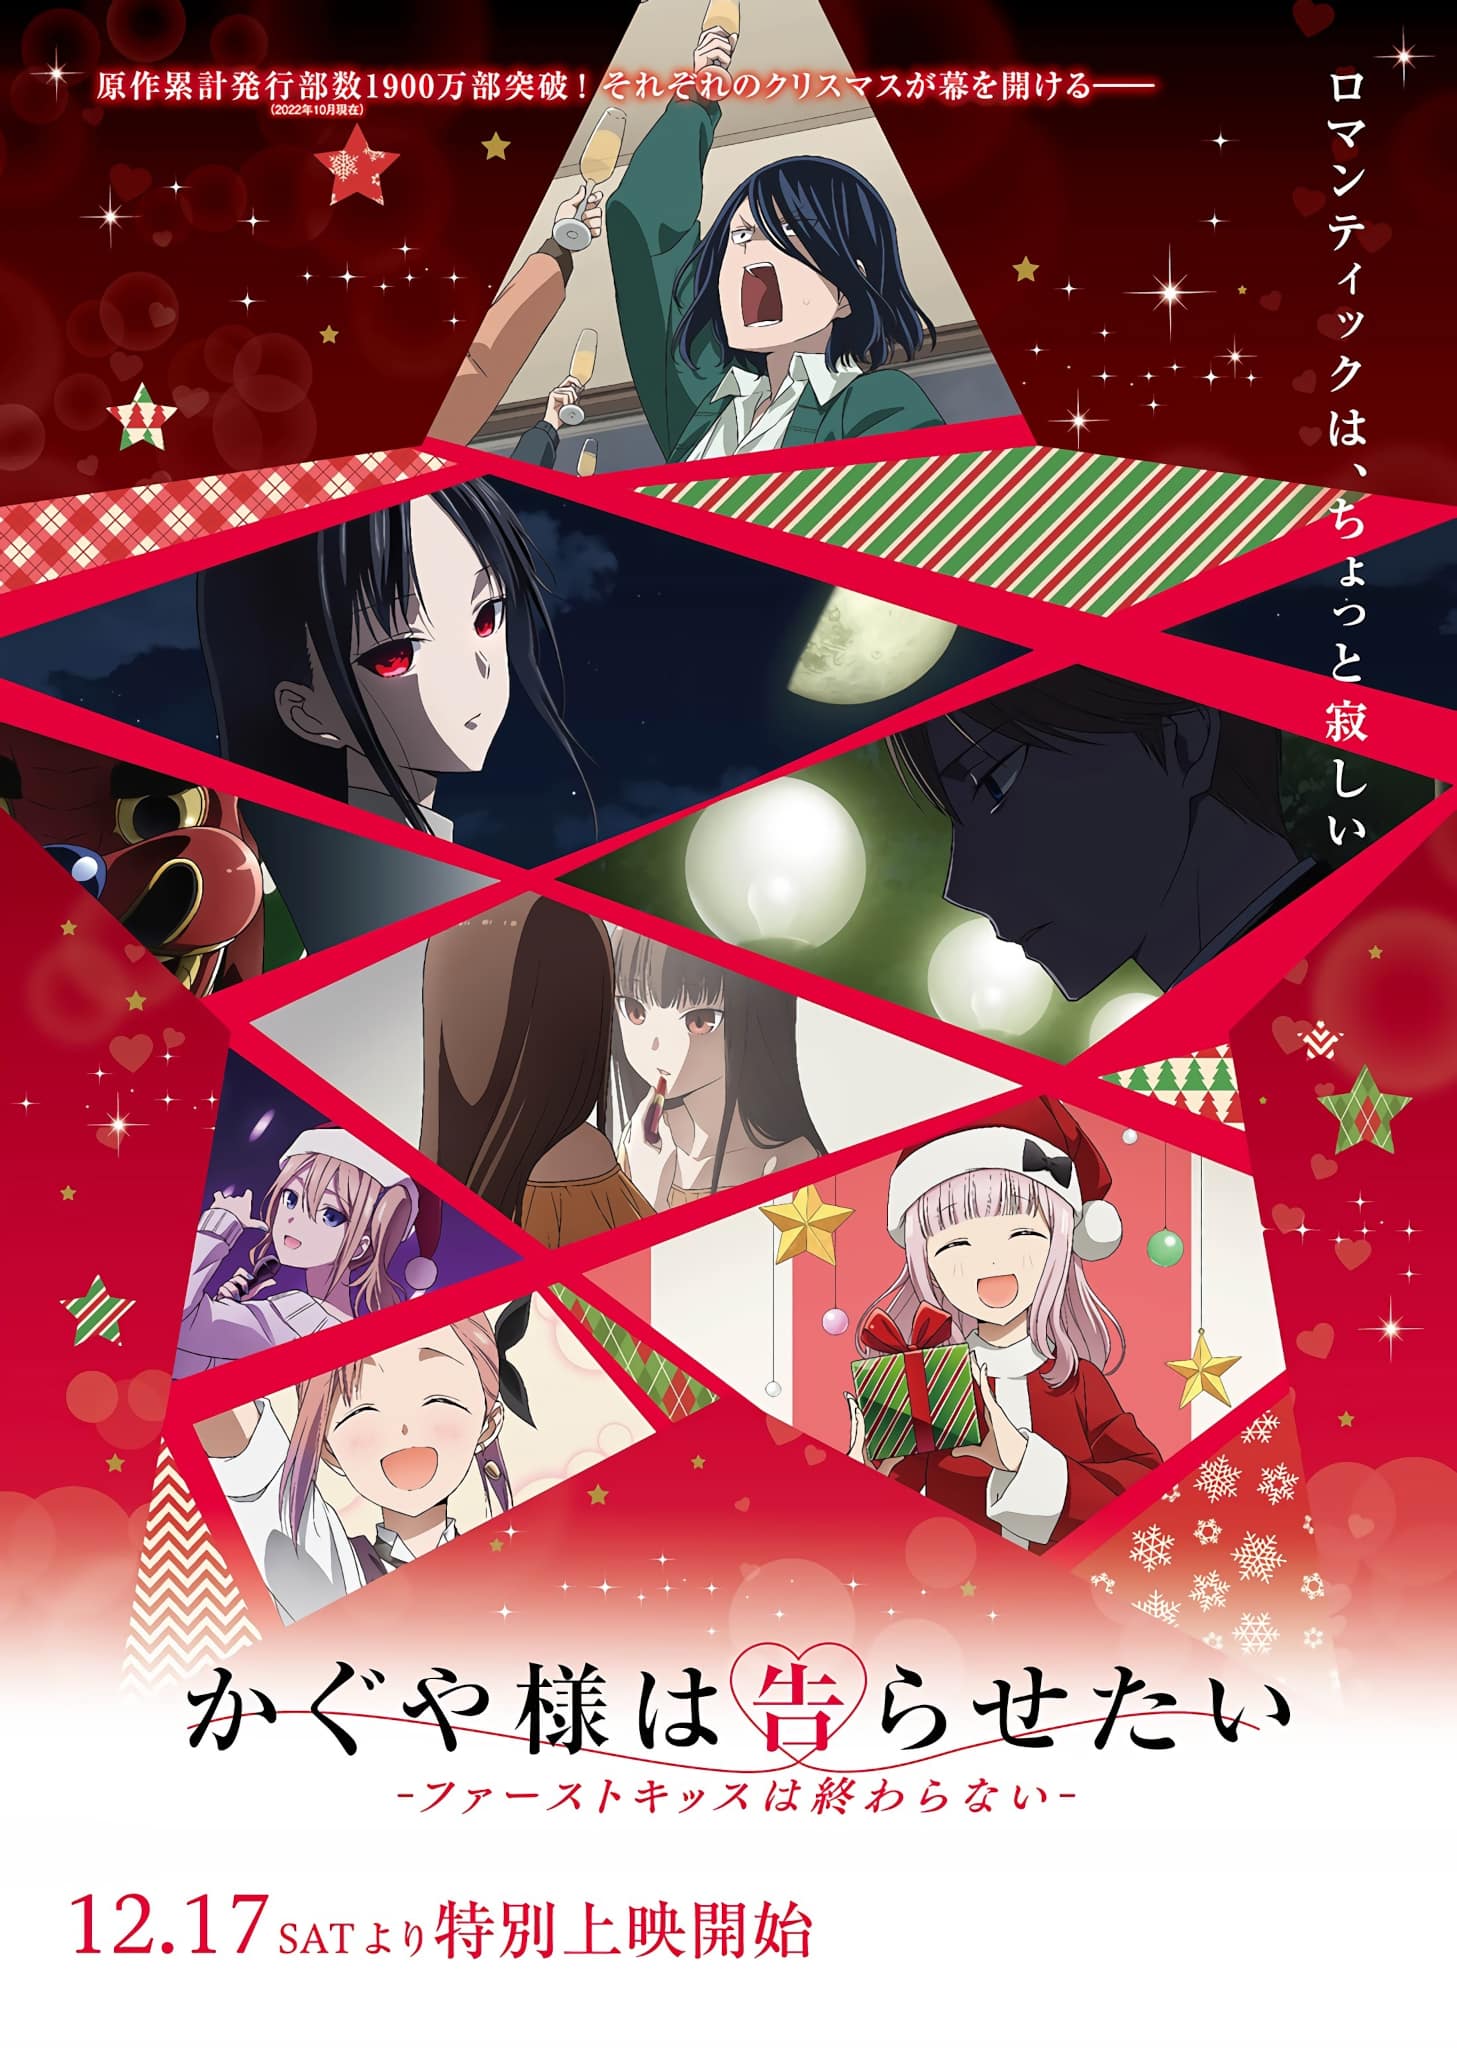 Second visuel pour le film Kaguya-sama : Love is War - The First Kiss That Never Ends